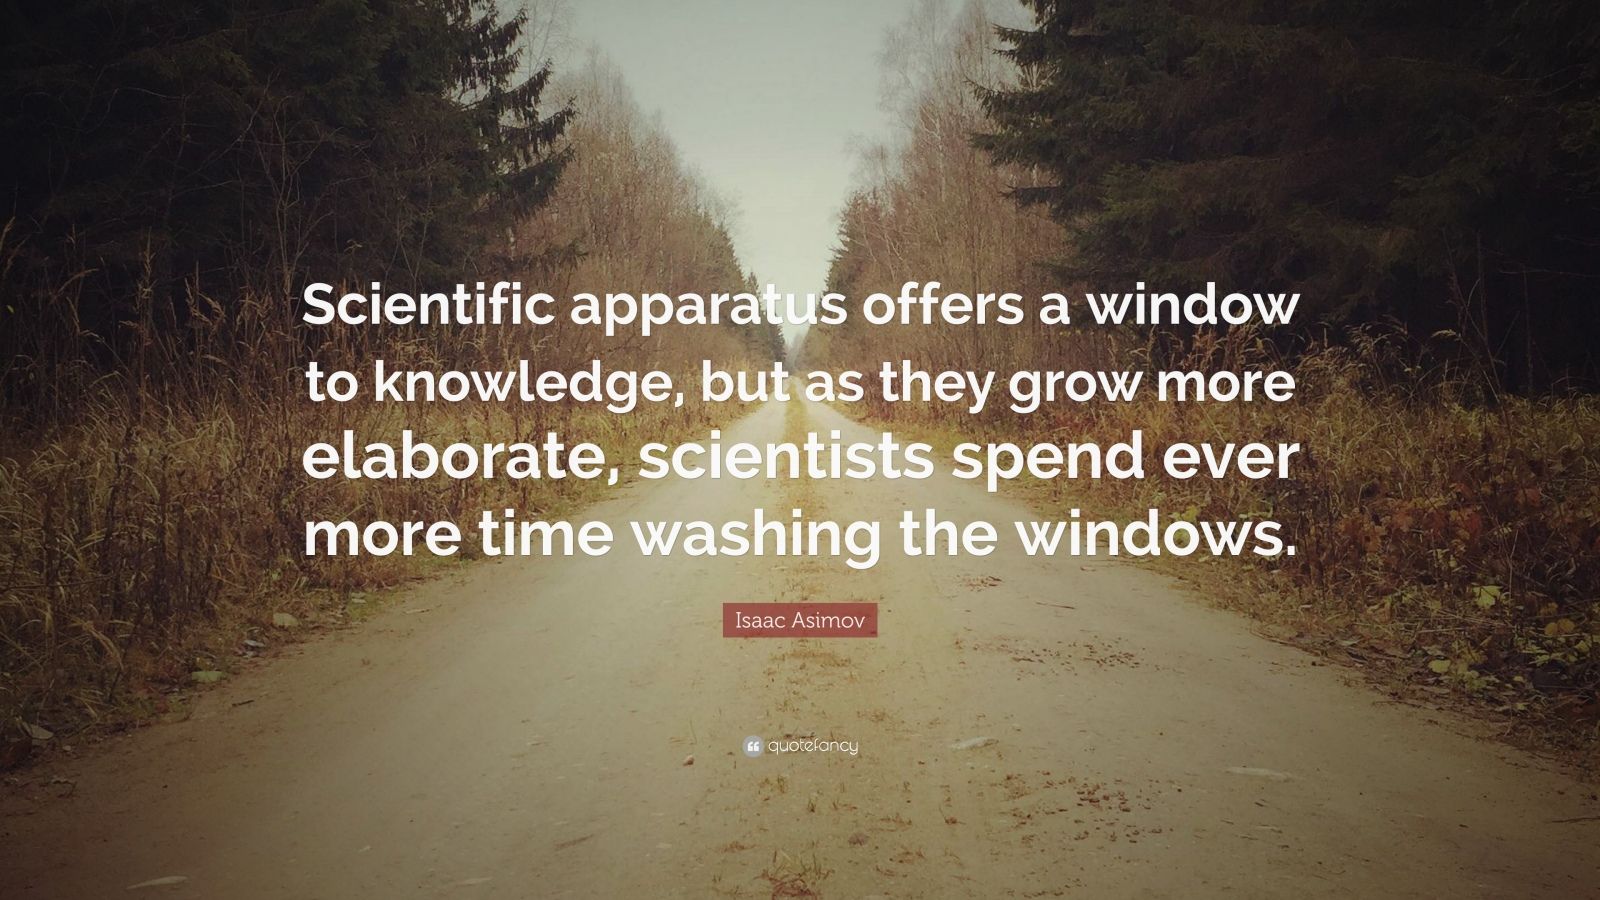 Isaac Asimov Quote: “Scientific apparatus offers a window to knowledge